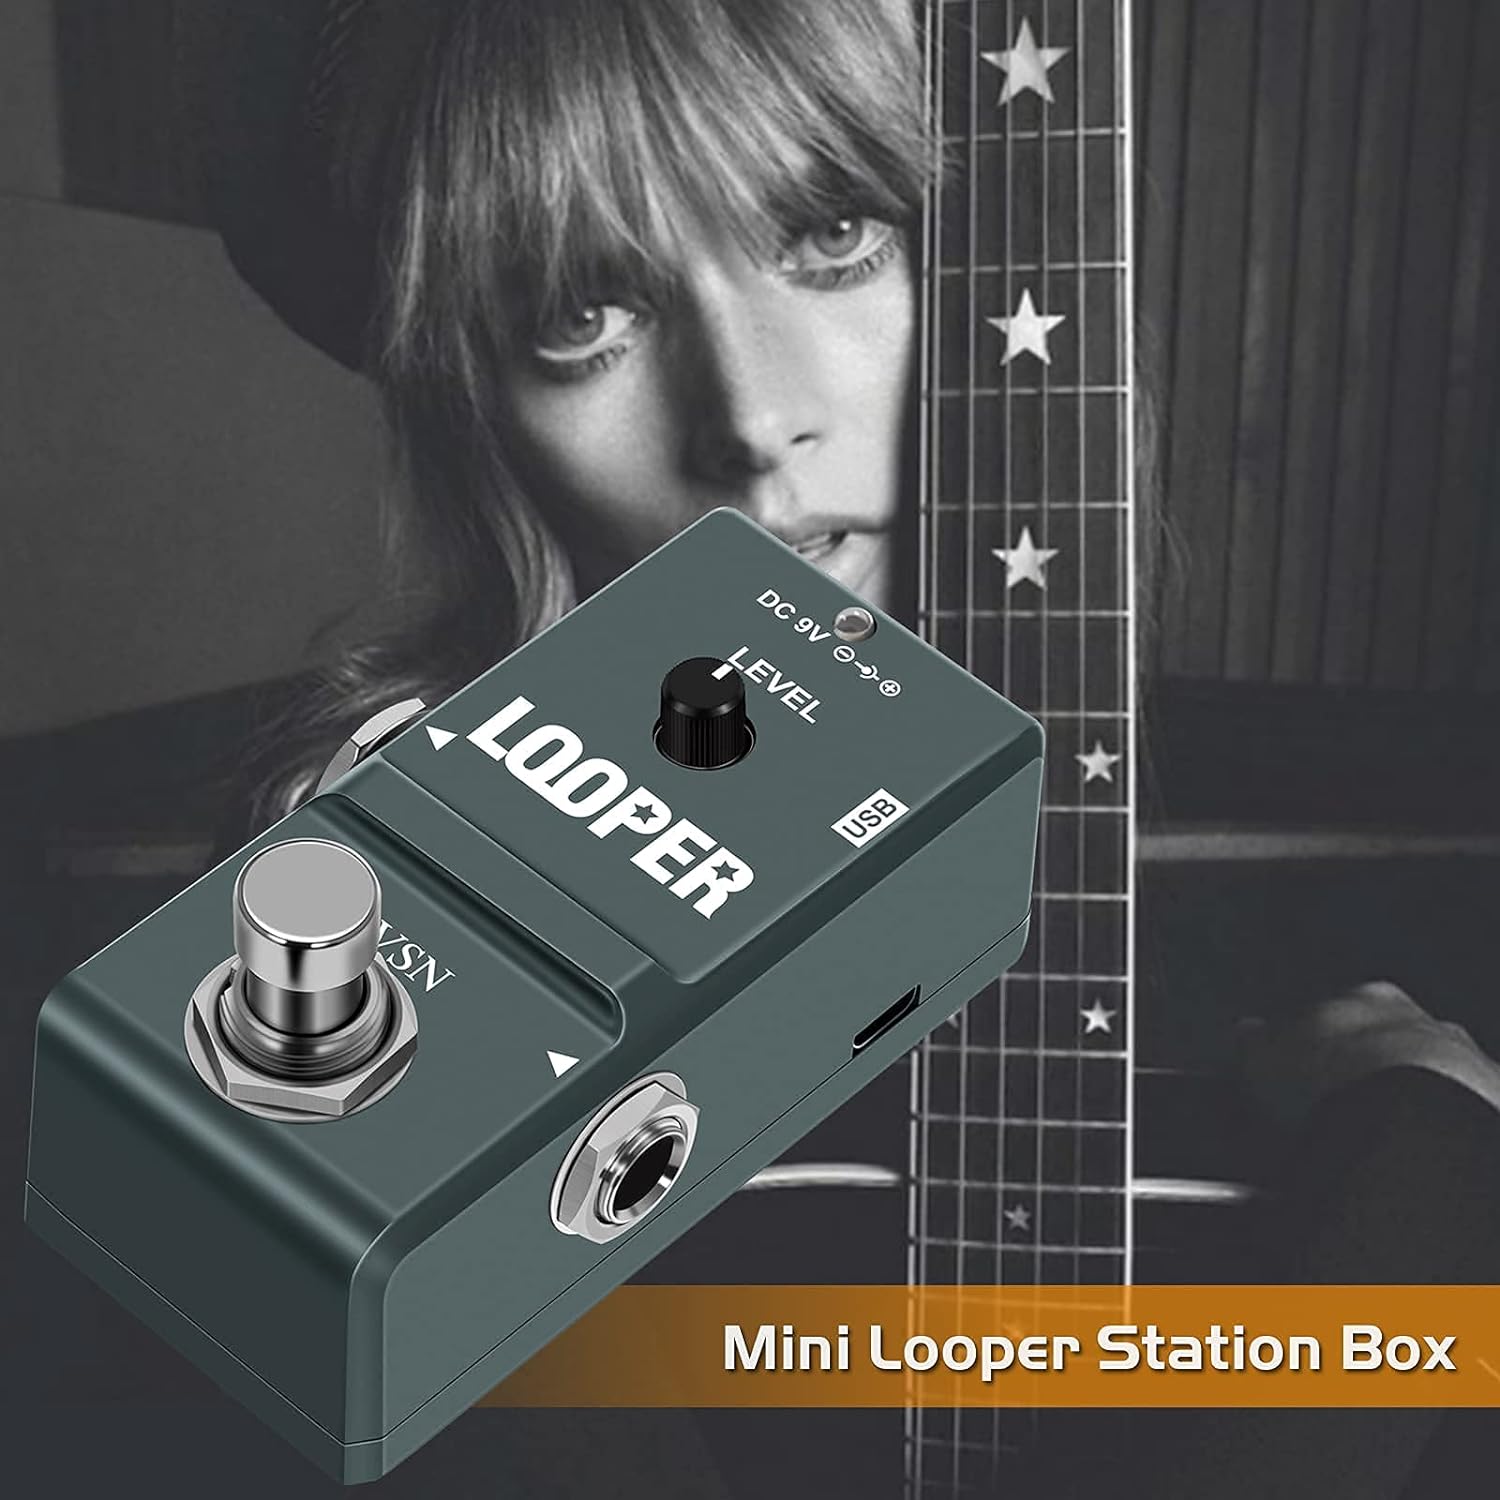 VSN 48K Looper Electric Guitar Effect Loop Pedal 10 Minutes of Looping Unlimited Overdubs USB Port True Bypass